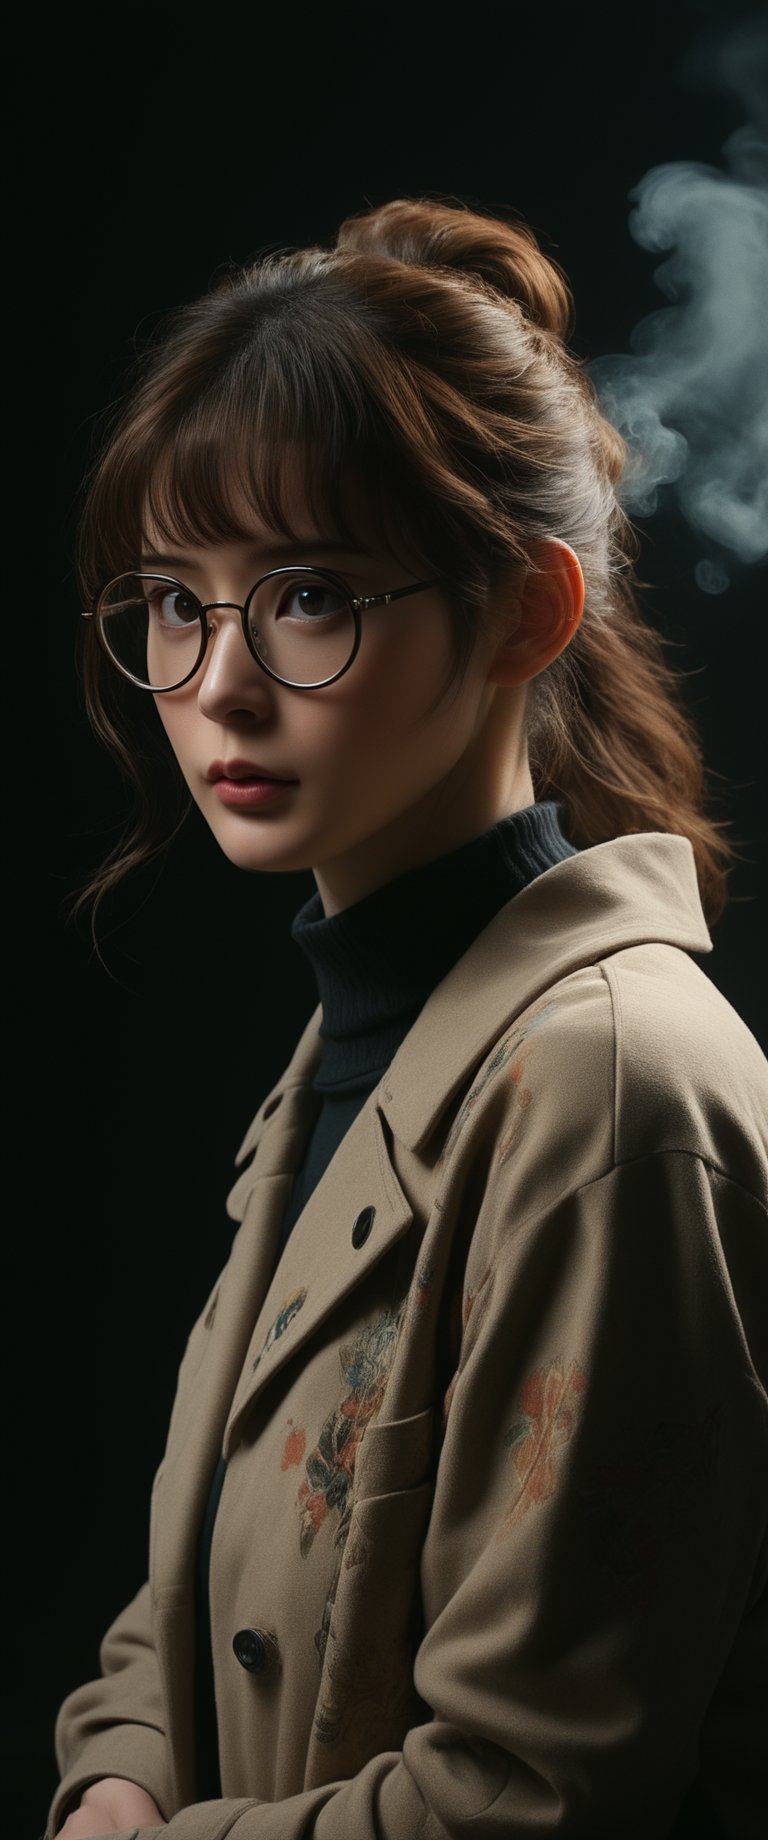 breathtaking ethereal RAW photo of female, ((1girl, brown hair, ponytail, black eyes, glasses, round glasses, Beige coat, black sweater, black skirt, , looking at viewer, dark background, smoke, smoking, cigarette, bored,



 )), dark and moody style, perfect face, outstretched perfect hands. masterpiece, professional, award-winning, intricate details, ultra high detailed, 64k, dramatic light, volumetric light, dynamic lighting, Epic, splash art .. ), by james jean $, roby dwi antono $, ross tran $. francis bacon $, michal mraz $, adrian ghenie $, petra cortright $, gerhard richter $, takato yamamoto $, ashley wood, tense atmospheric, , , , sooyaaa,IMGFIX,Comic Book-Style,Movie Aesthetic,action shot,photo r3al ,bad quality image,oil painting, cinematic moviemaker style,Japan Vibes,H effect,koh_yunjung ,koh_yunjung,kwon-nara,sooyaaa,colorful,bones,skulls,armor,han-hyoju-xl
,DonMn1ghtm4reXL, ct-fujiii,ct-jeniiii, ct-goeuun,mad-cyberspace,FuturEvoLab-mecha,cinematic_grain_of_film,a frame of an animated film of,score_9,3D,style akirafilm,Wellington22A,Mina Tepes,lucia:_plume_(sinful_oath )_(punishing:_g,VAMPL, FANG-L ,kizuki_rei, ct-eujiiin,Jujutsu Kaisen Season 2 Anime Style,ChaHaeInSL,Mavelle,Uguisu Anko